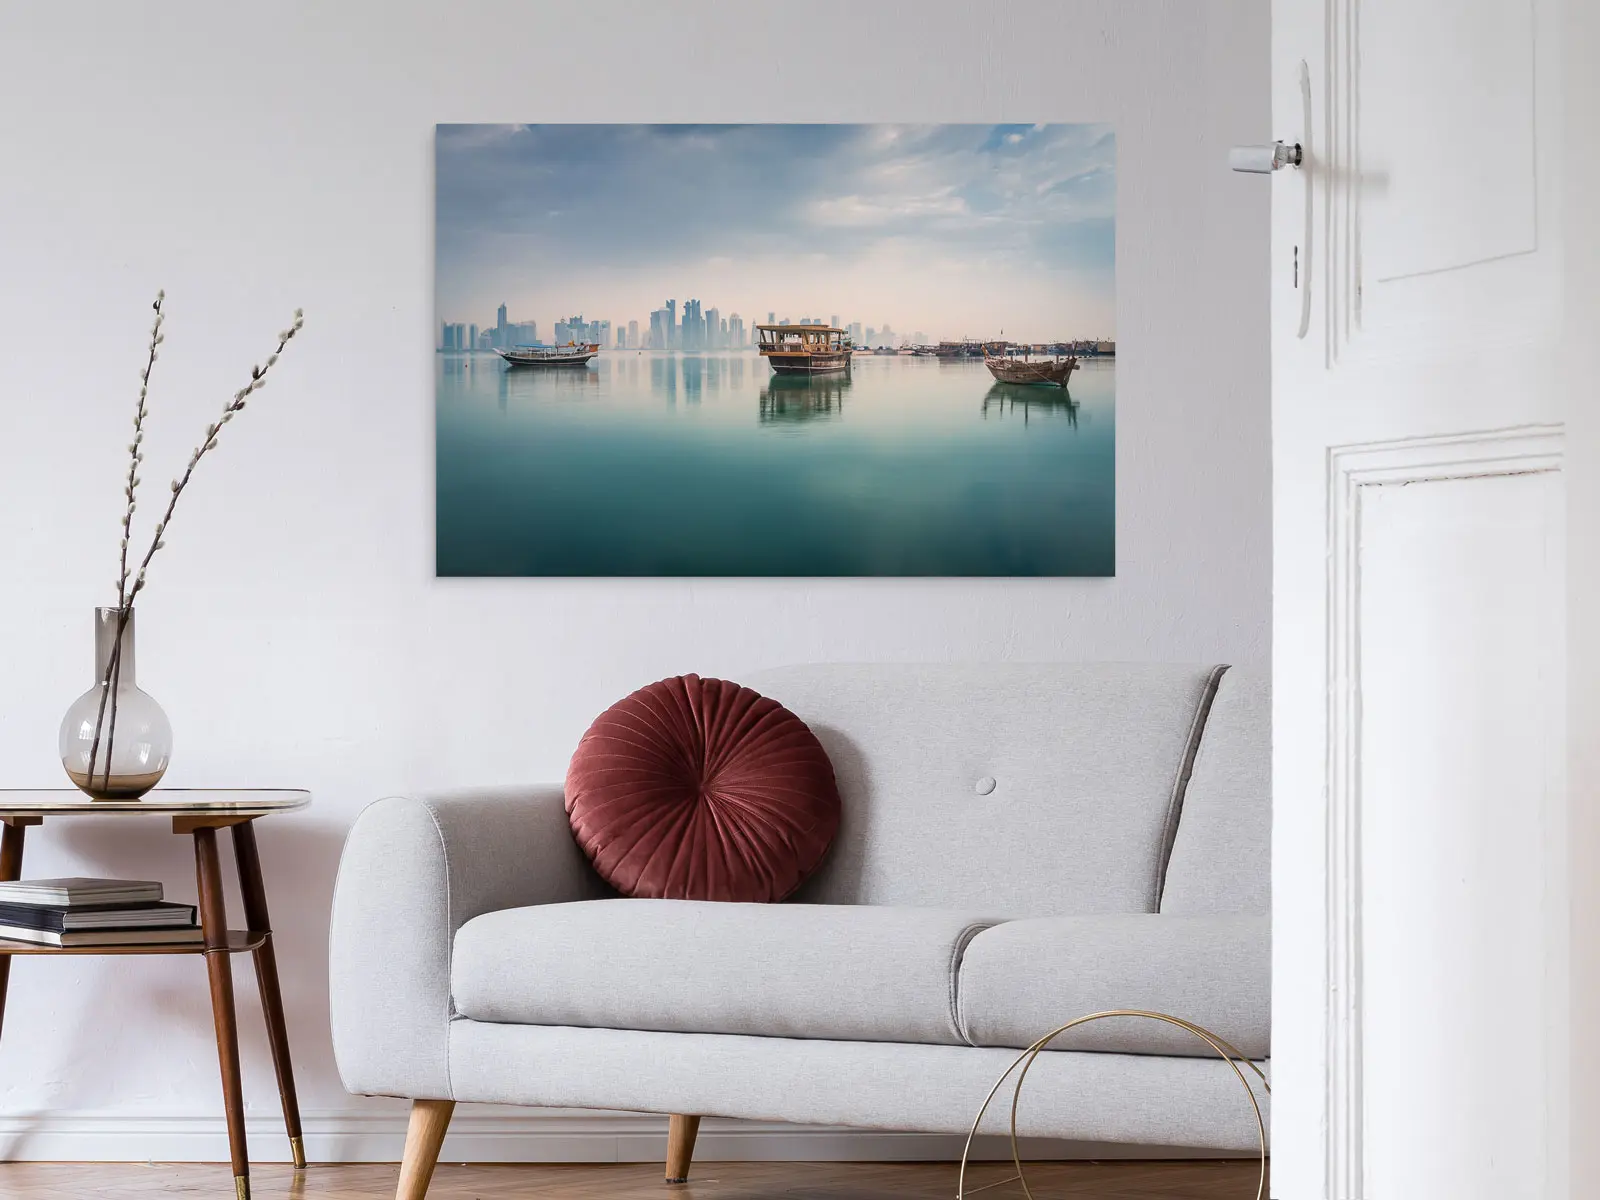 Three boats reflected on the calm sea surface, while in the background is a skyline on a Photo Print On Aluminum Backing hangs on a wall in a living room.